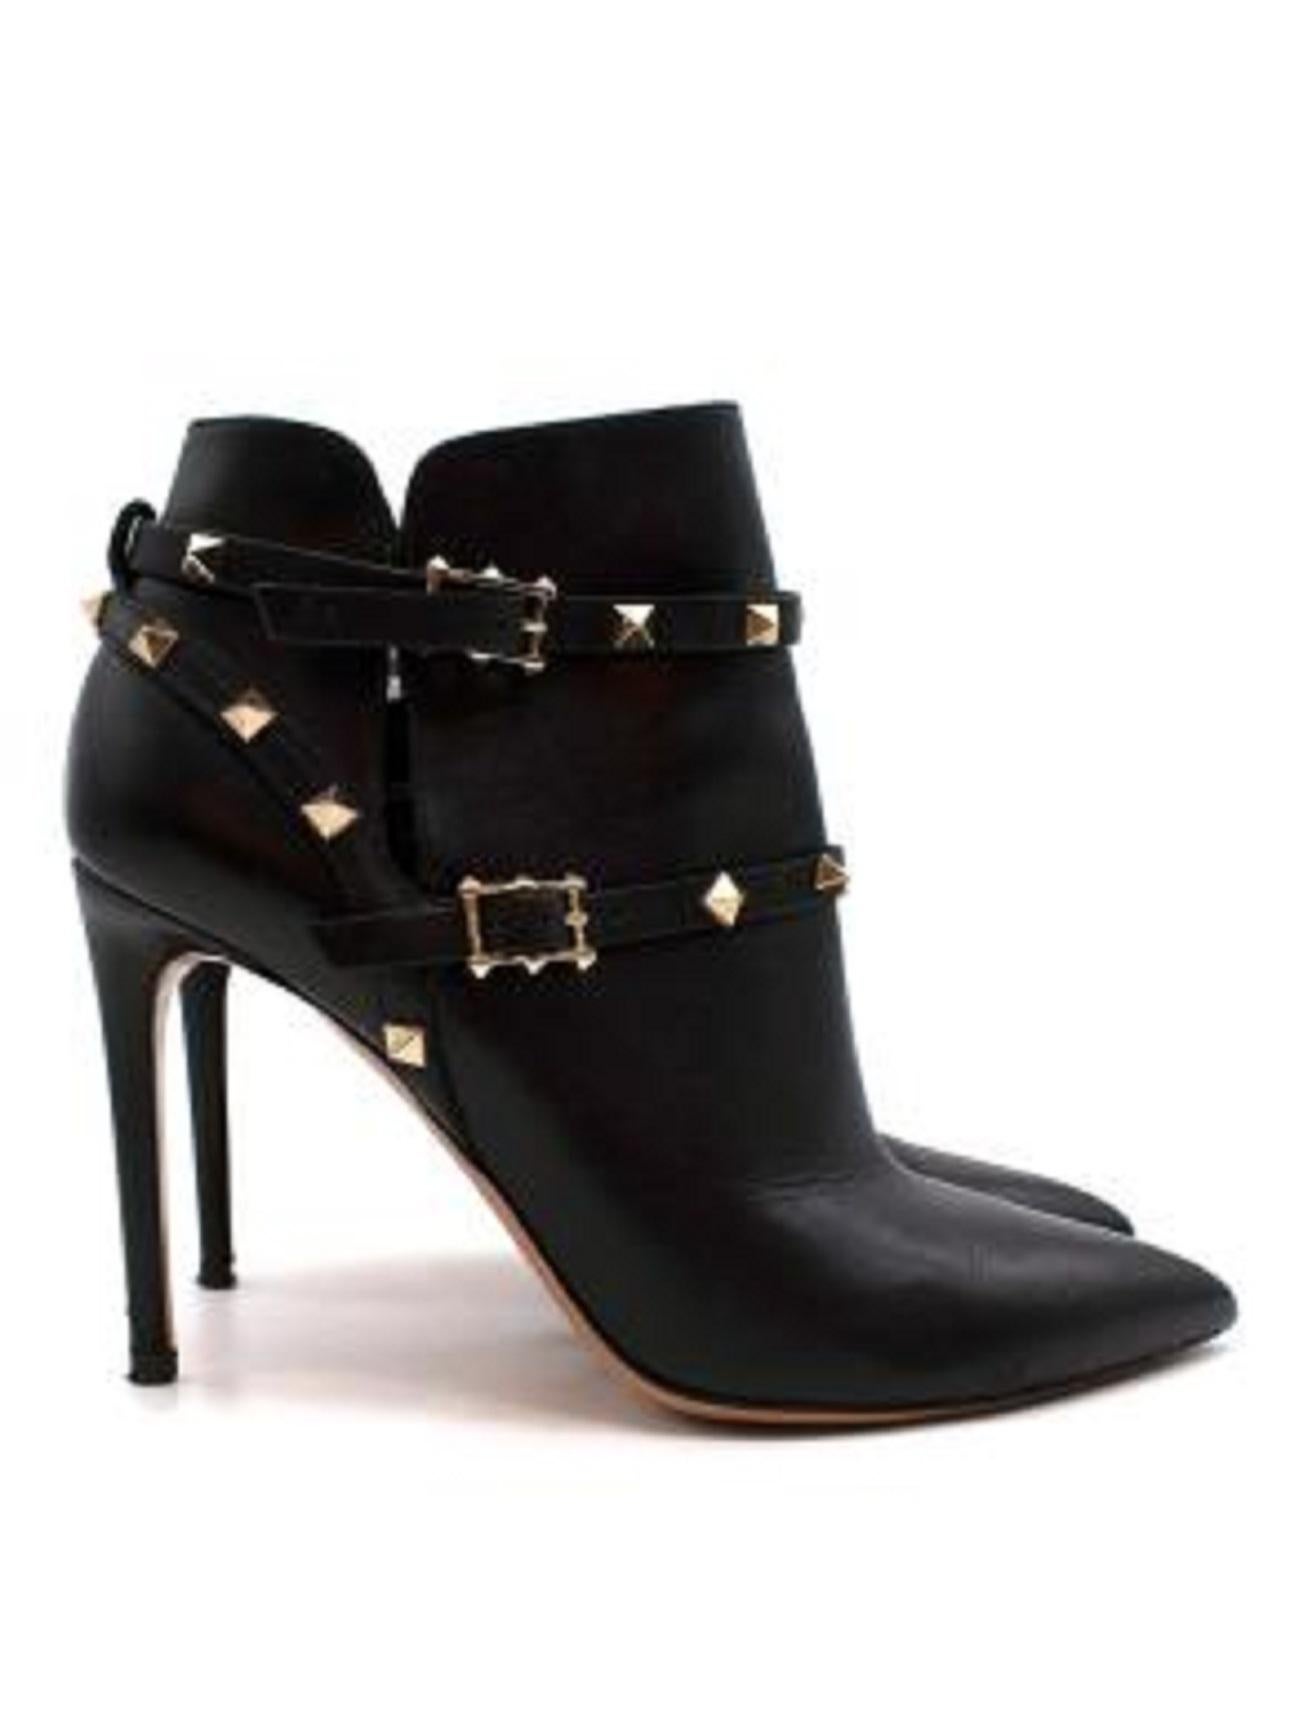 Valentino Black Leather Rockstud Ankle Boots

- Smooth calfskin
- Split sides
- Gold signature rockstuds
- Rockstud harness fastening
- Adjustable buckle ankle fastening
- Pointed and covered toe
- Stiletto heel
- Padded leather insole
- Covered